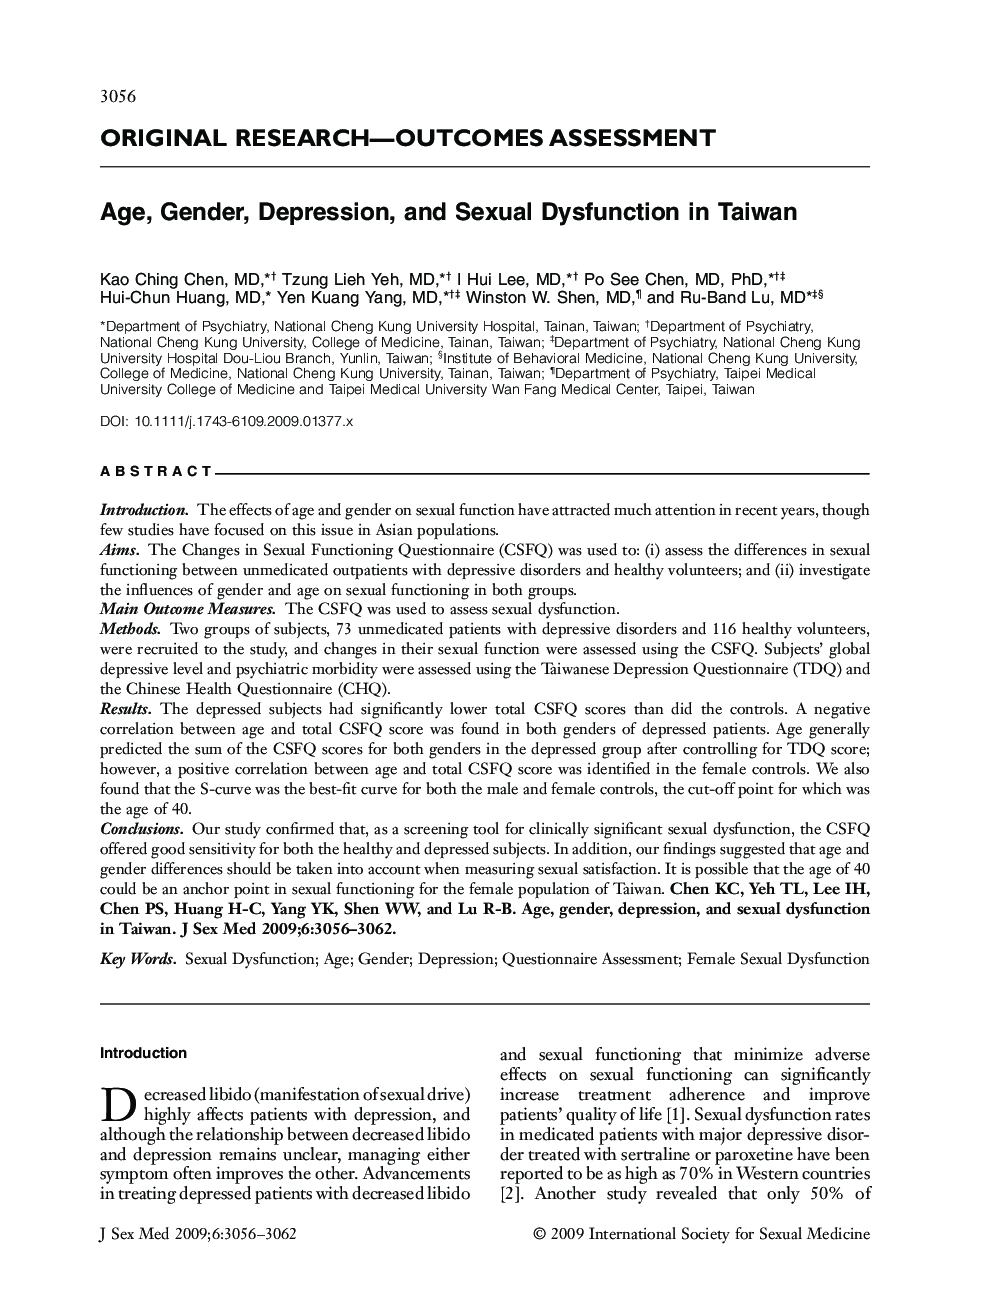 Age, Gender, Depression, and Sexual Dysfunction in Taiwan